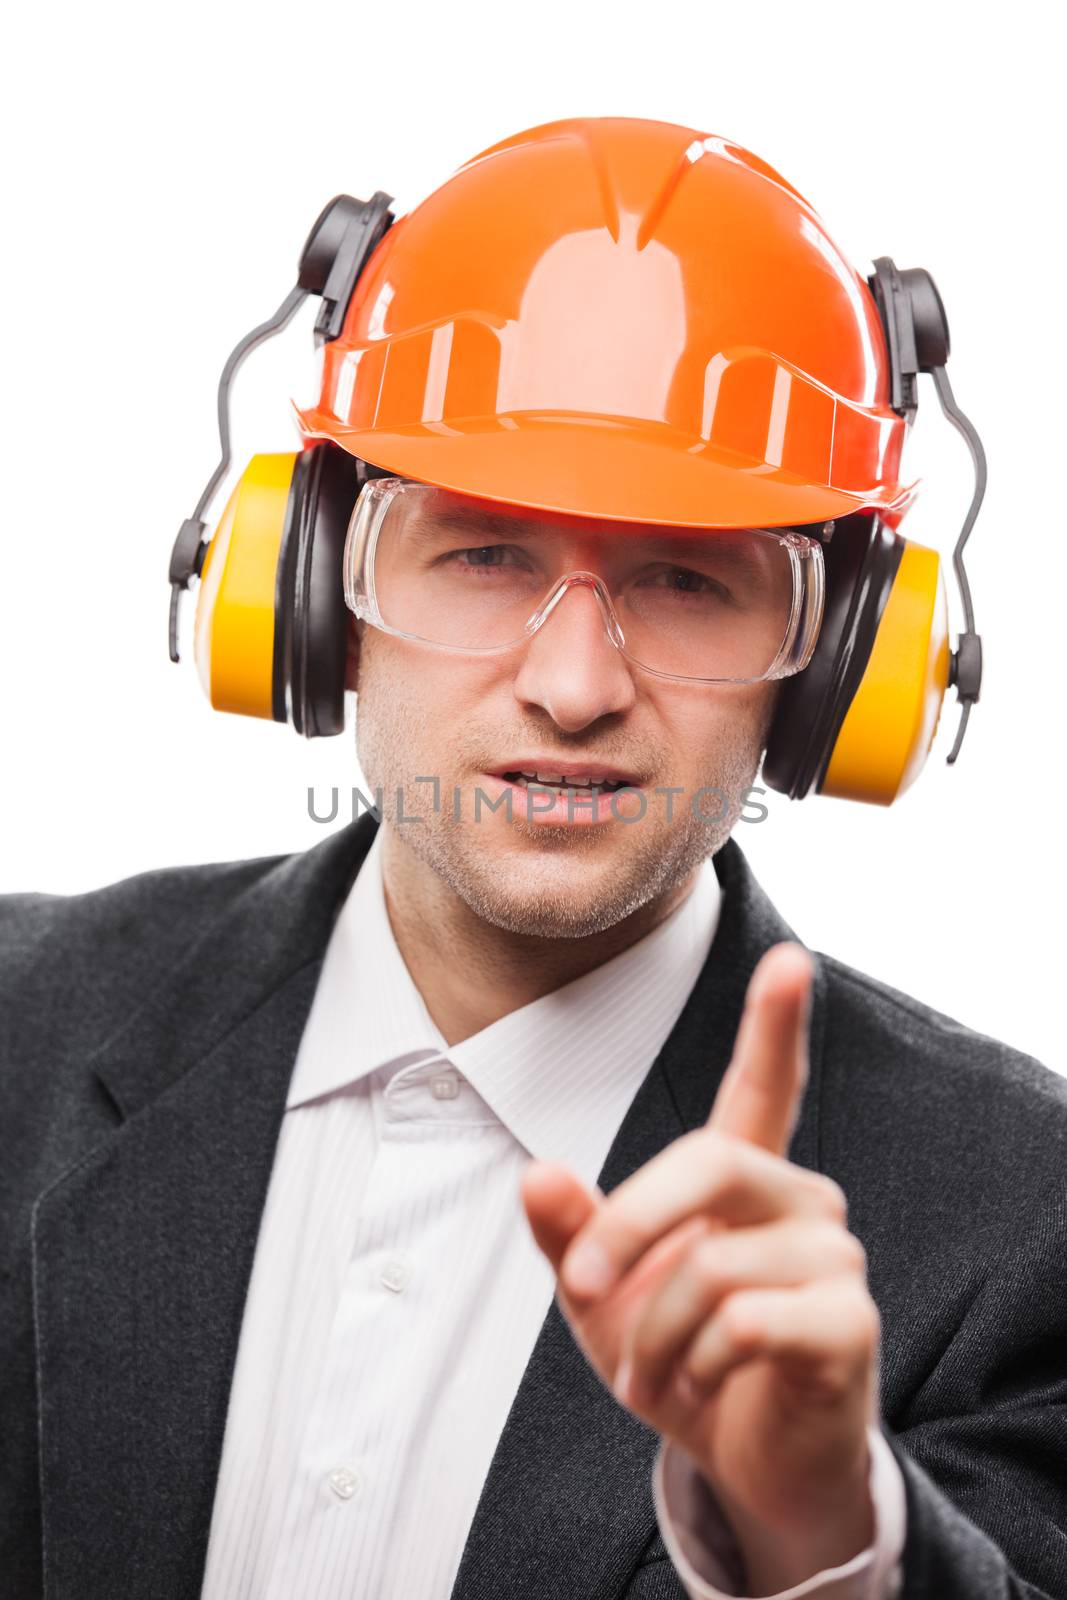 Businessman in safety hardhat helmet gesturing exclamation point by ia_64